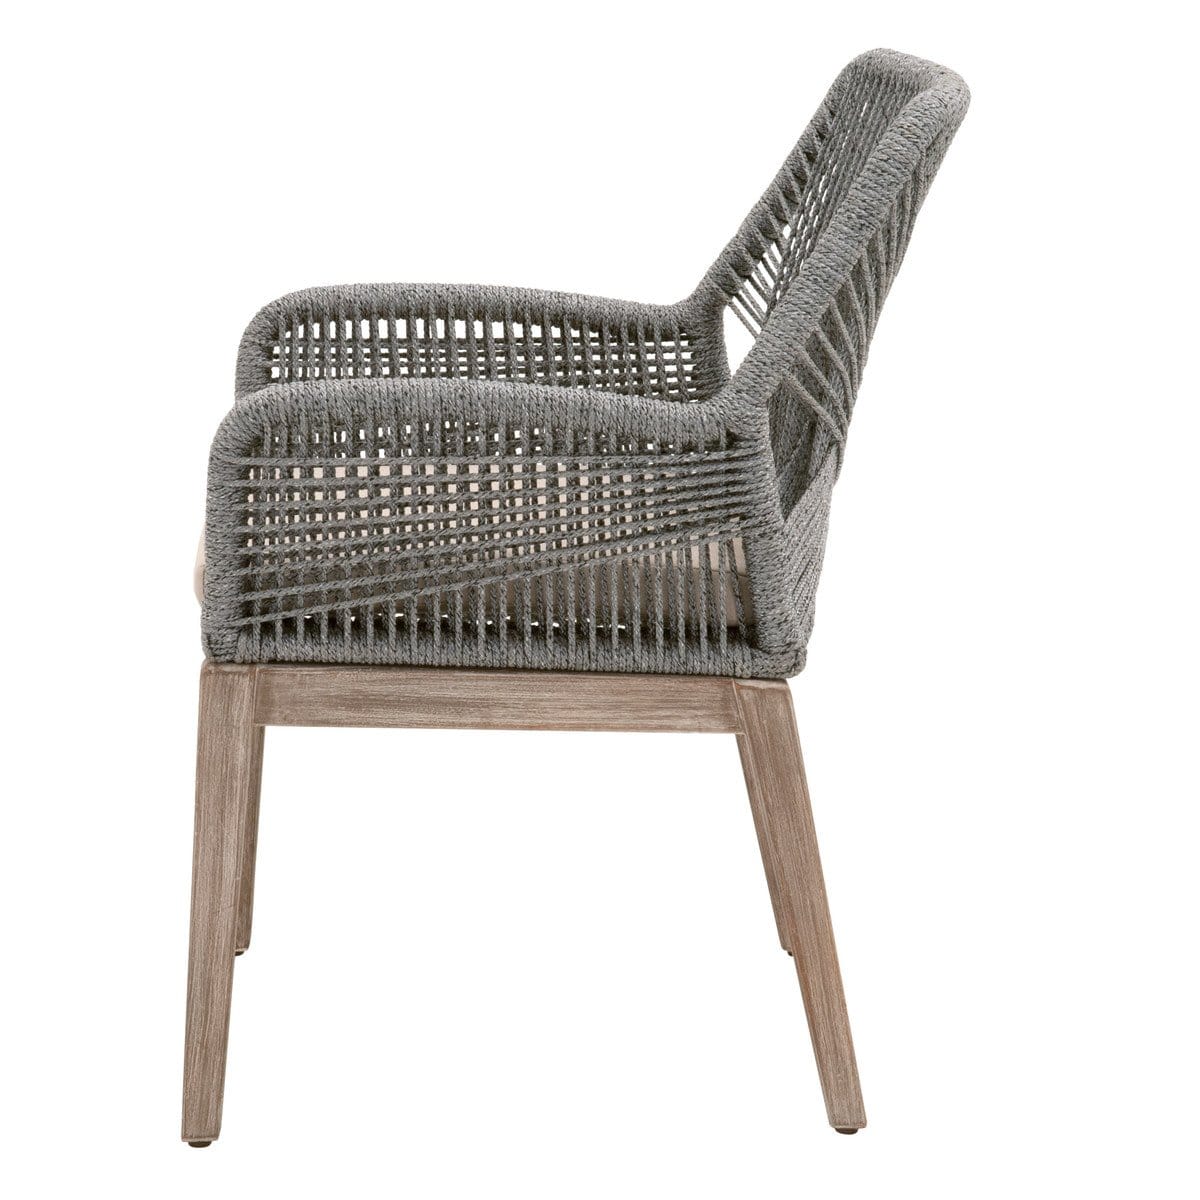 BLU Home Loom Arm Chair - Platinum (Set of 2) Furniture orient-express-6809KD.PLA/LGRY/NG 00842279106706